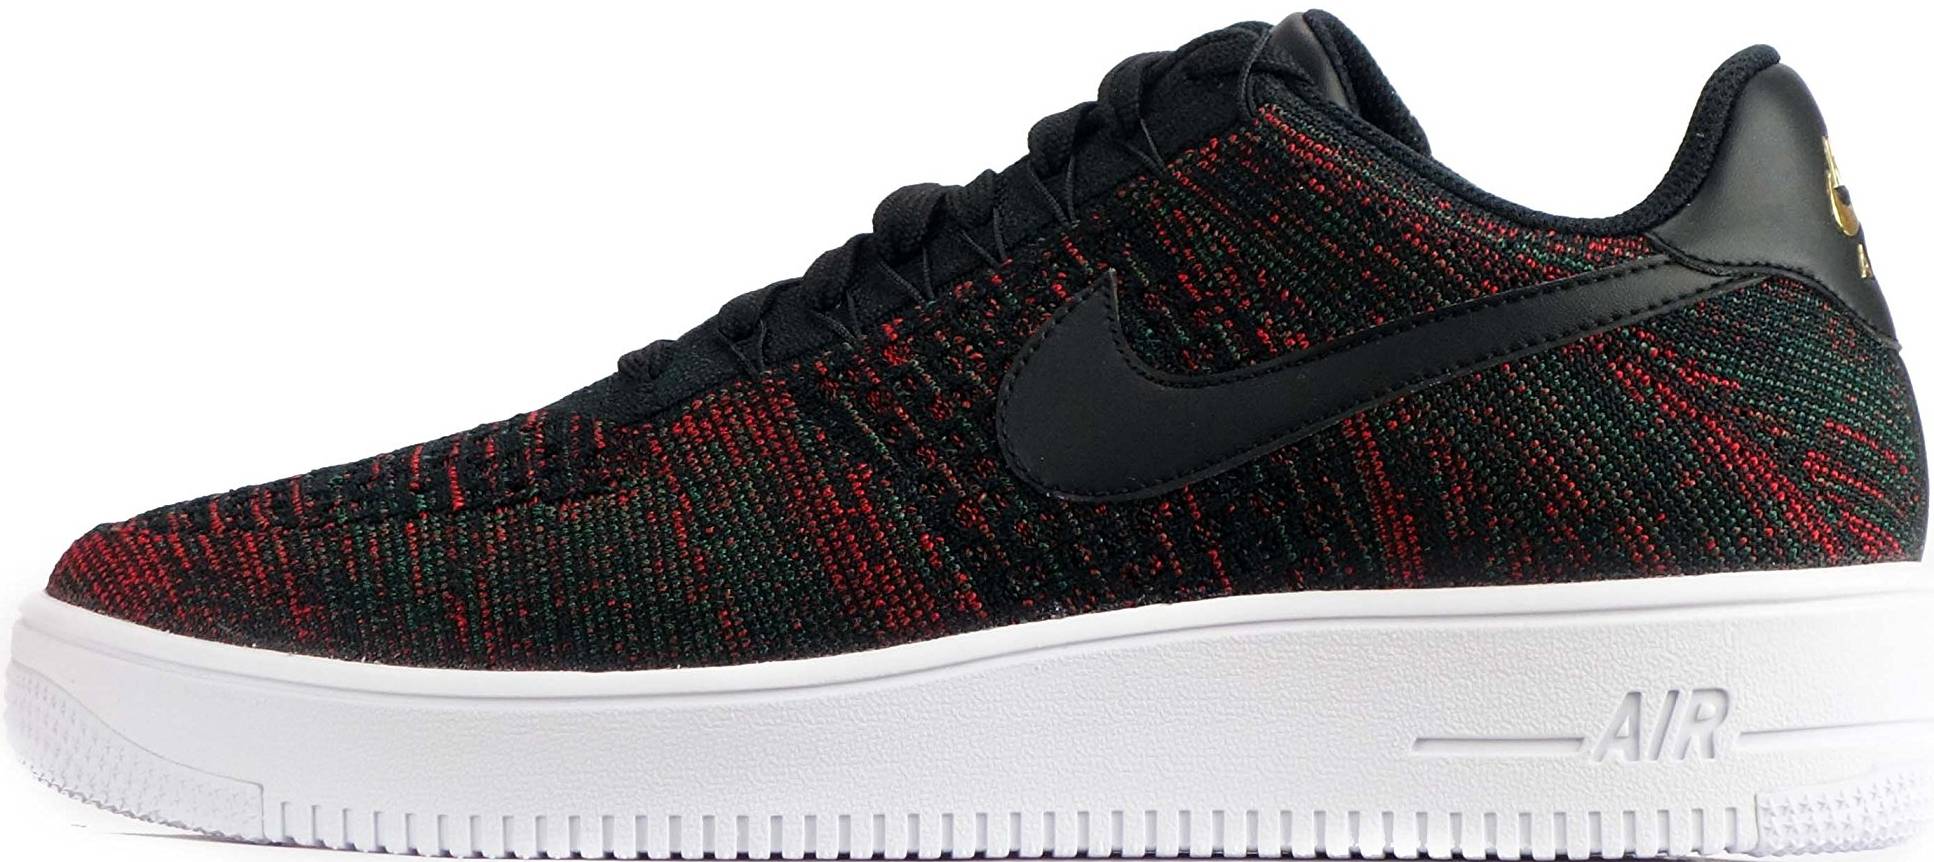 Nike Air Force 1 Ultra Flyknit Low sneakers in black (only $93 ...